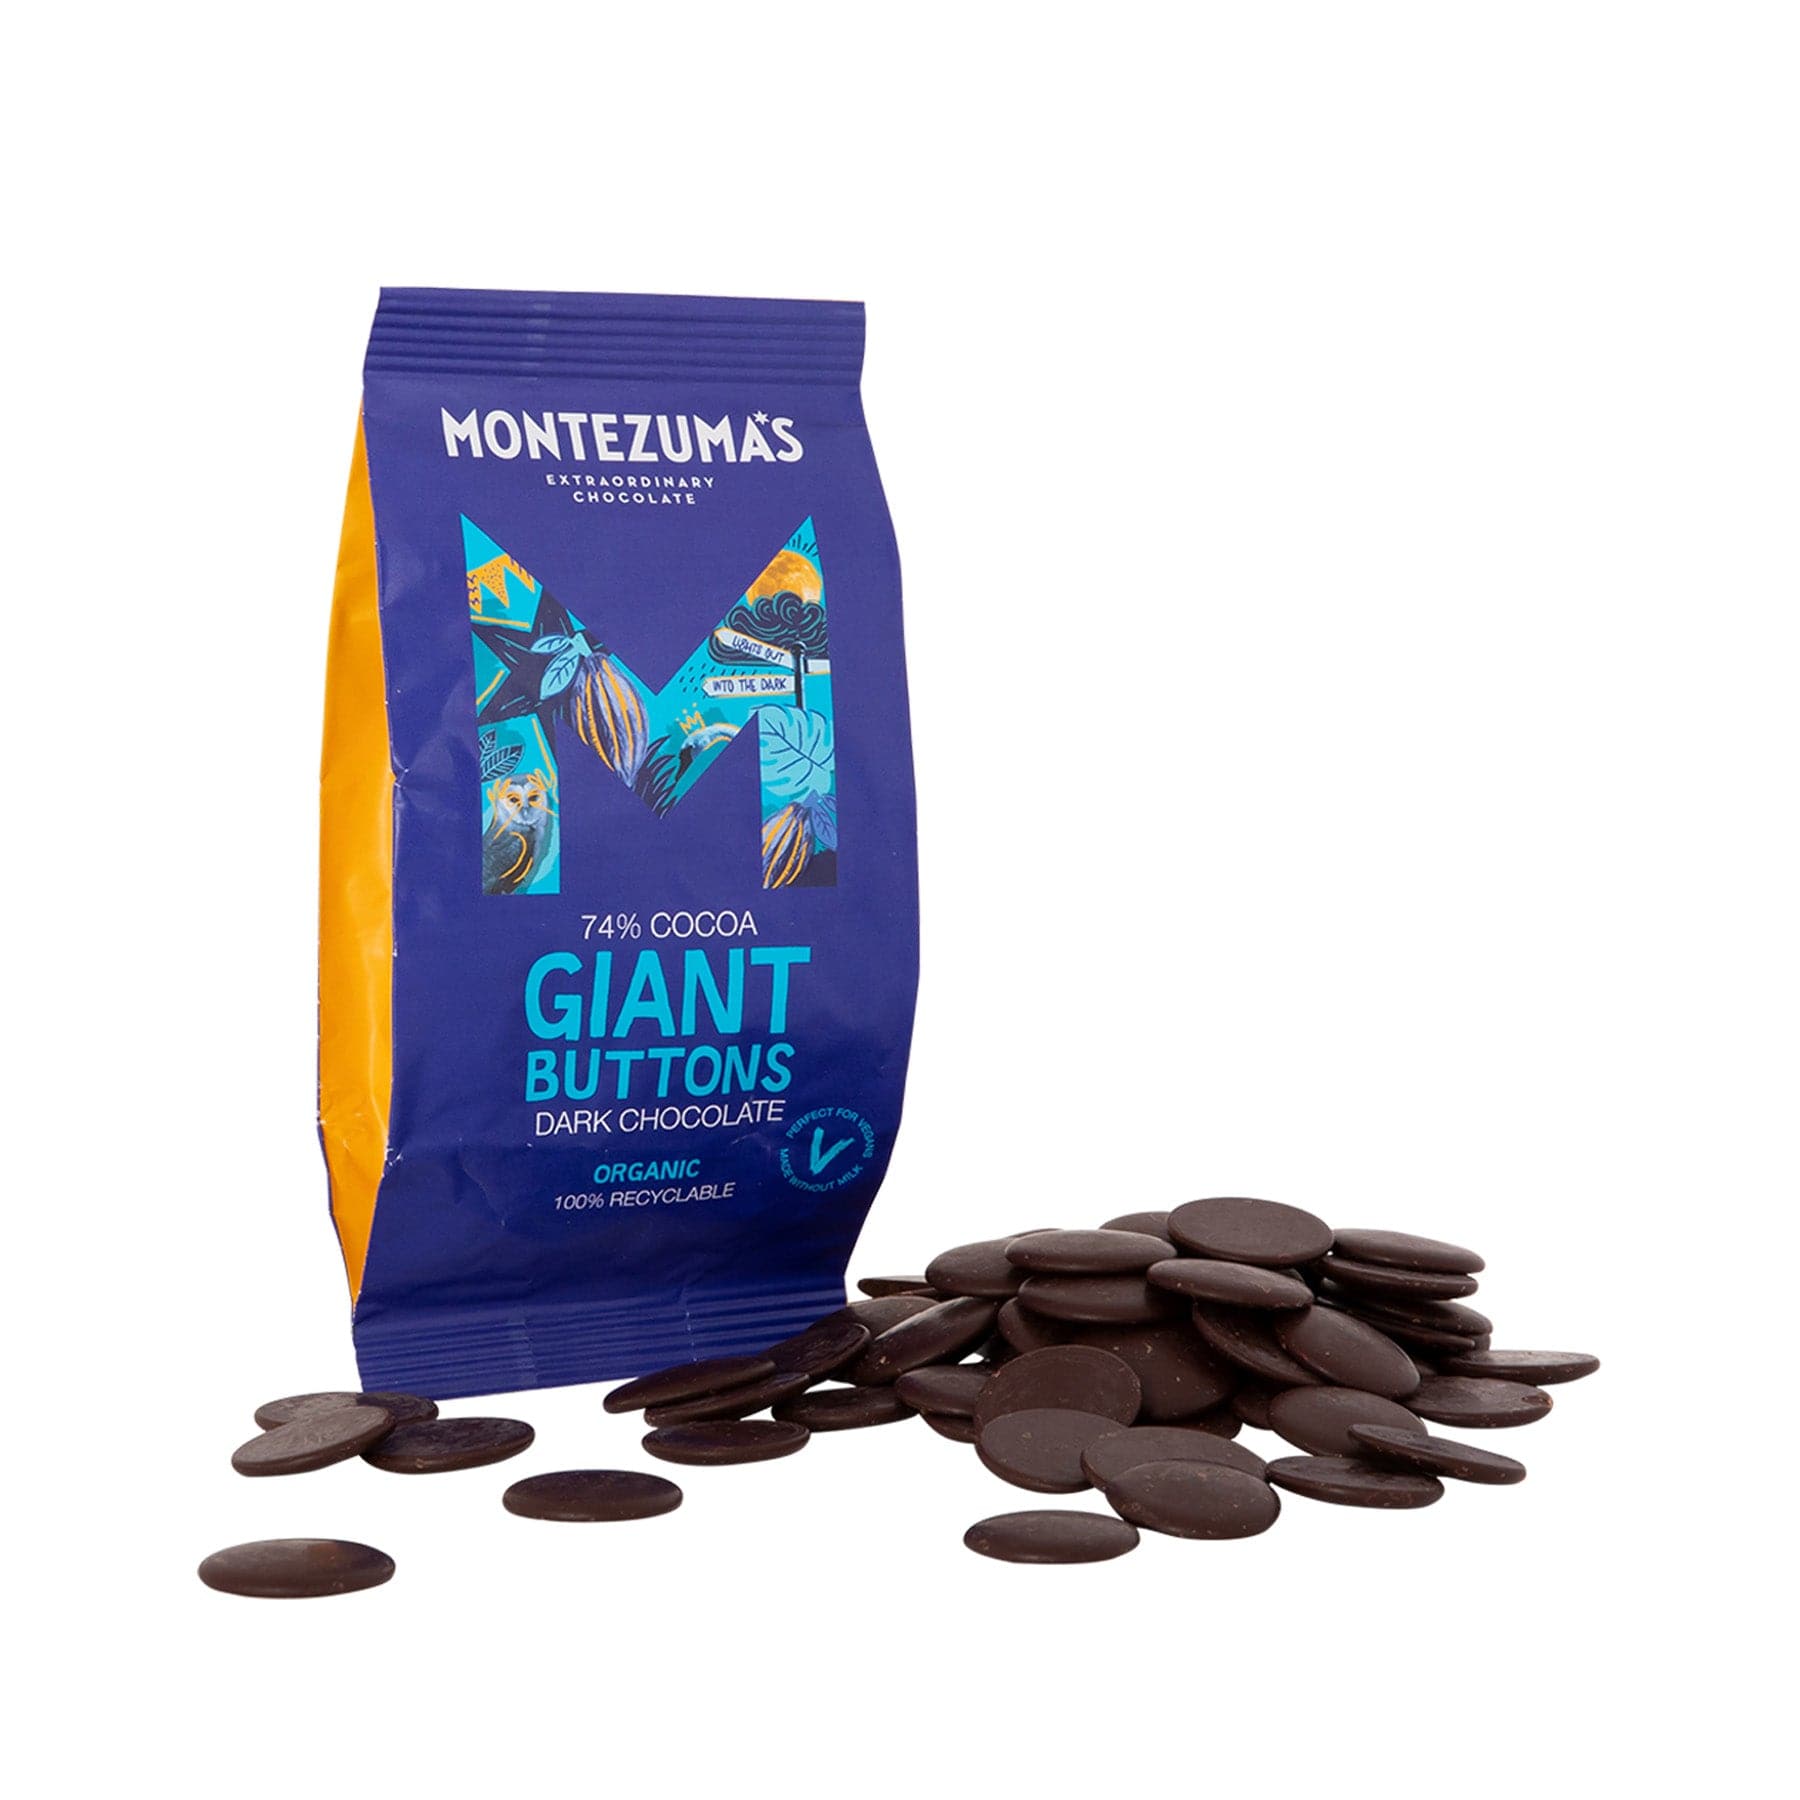 Giant dark chocolate buttons 180g